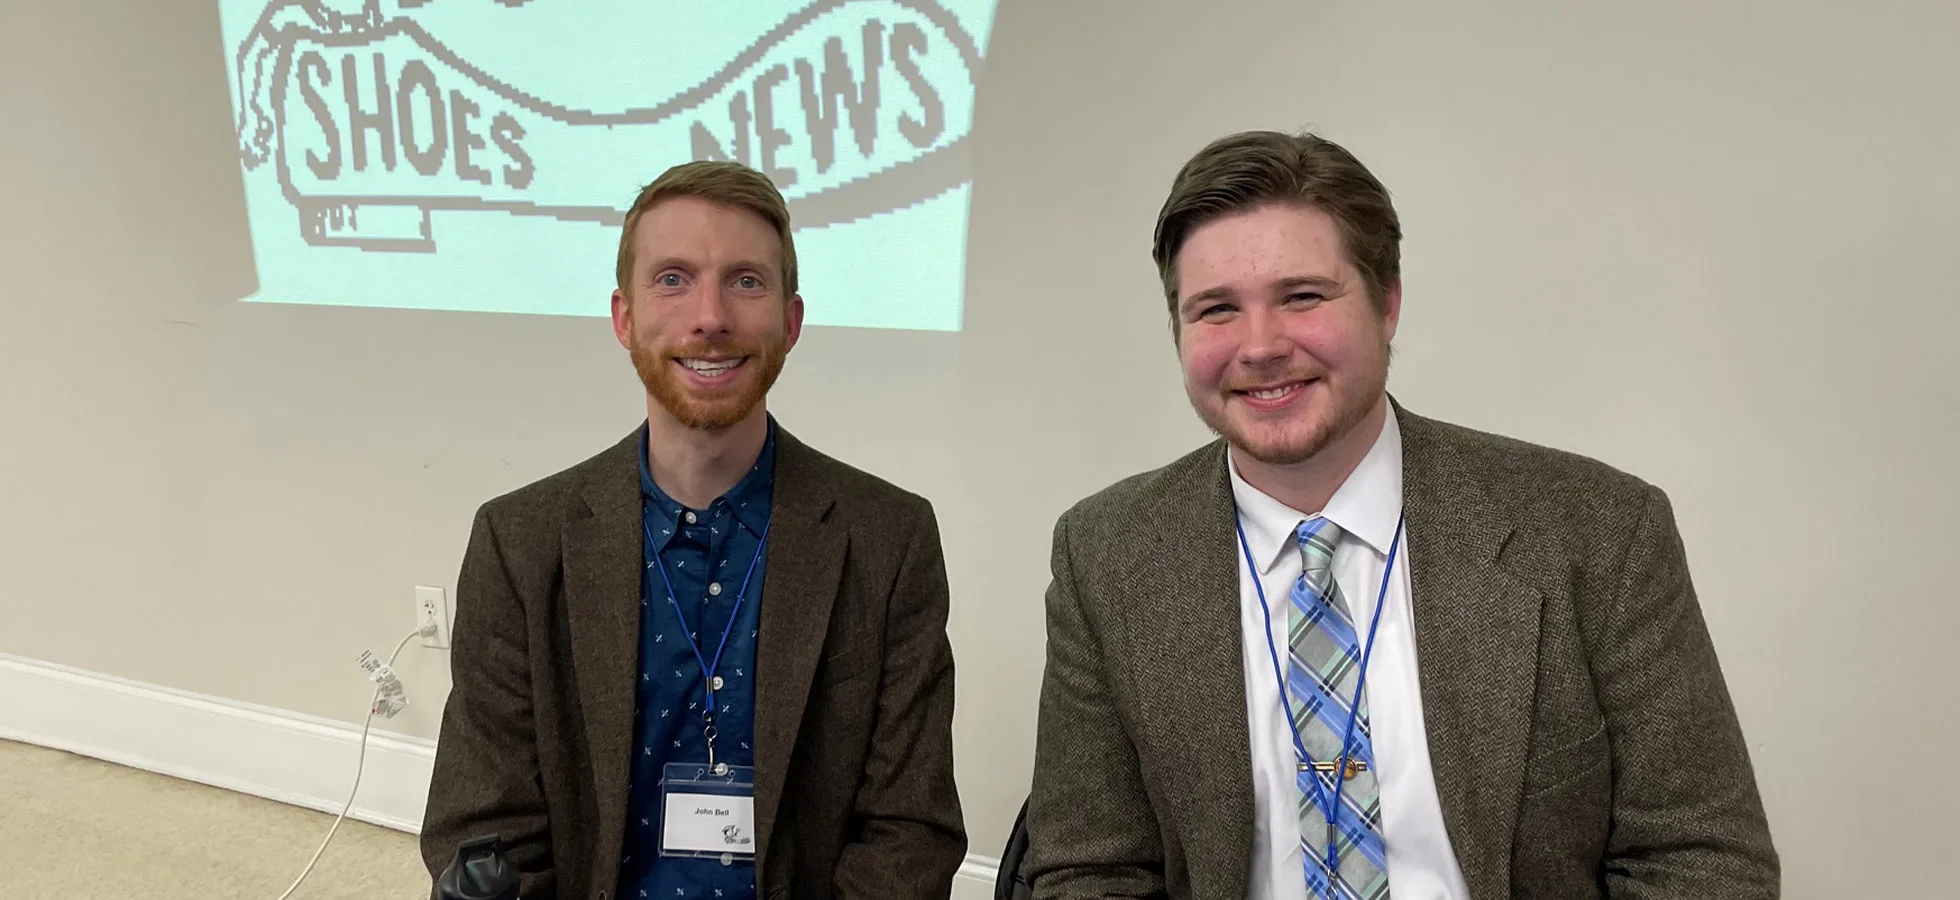 Last month, Adam Ide ‘24 and Assistant Professor of History John Bell, traveled to Columbia, South Carolina to present their research on emancipation and education at the Southern History of Education Society (SHOES) Conference.